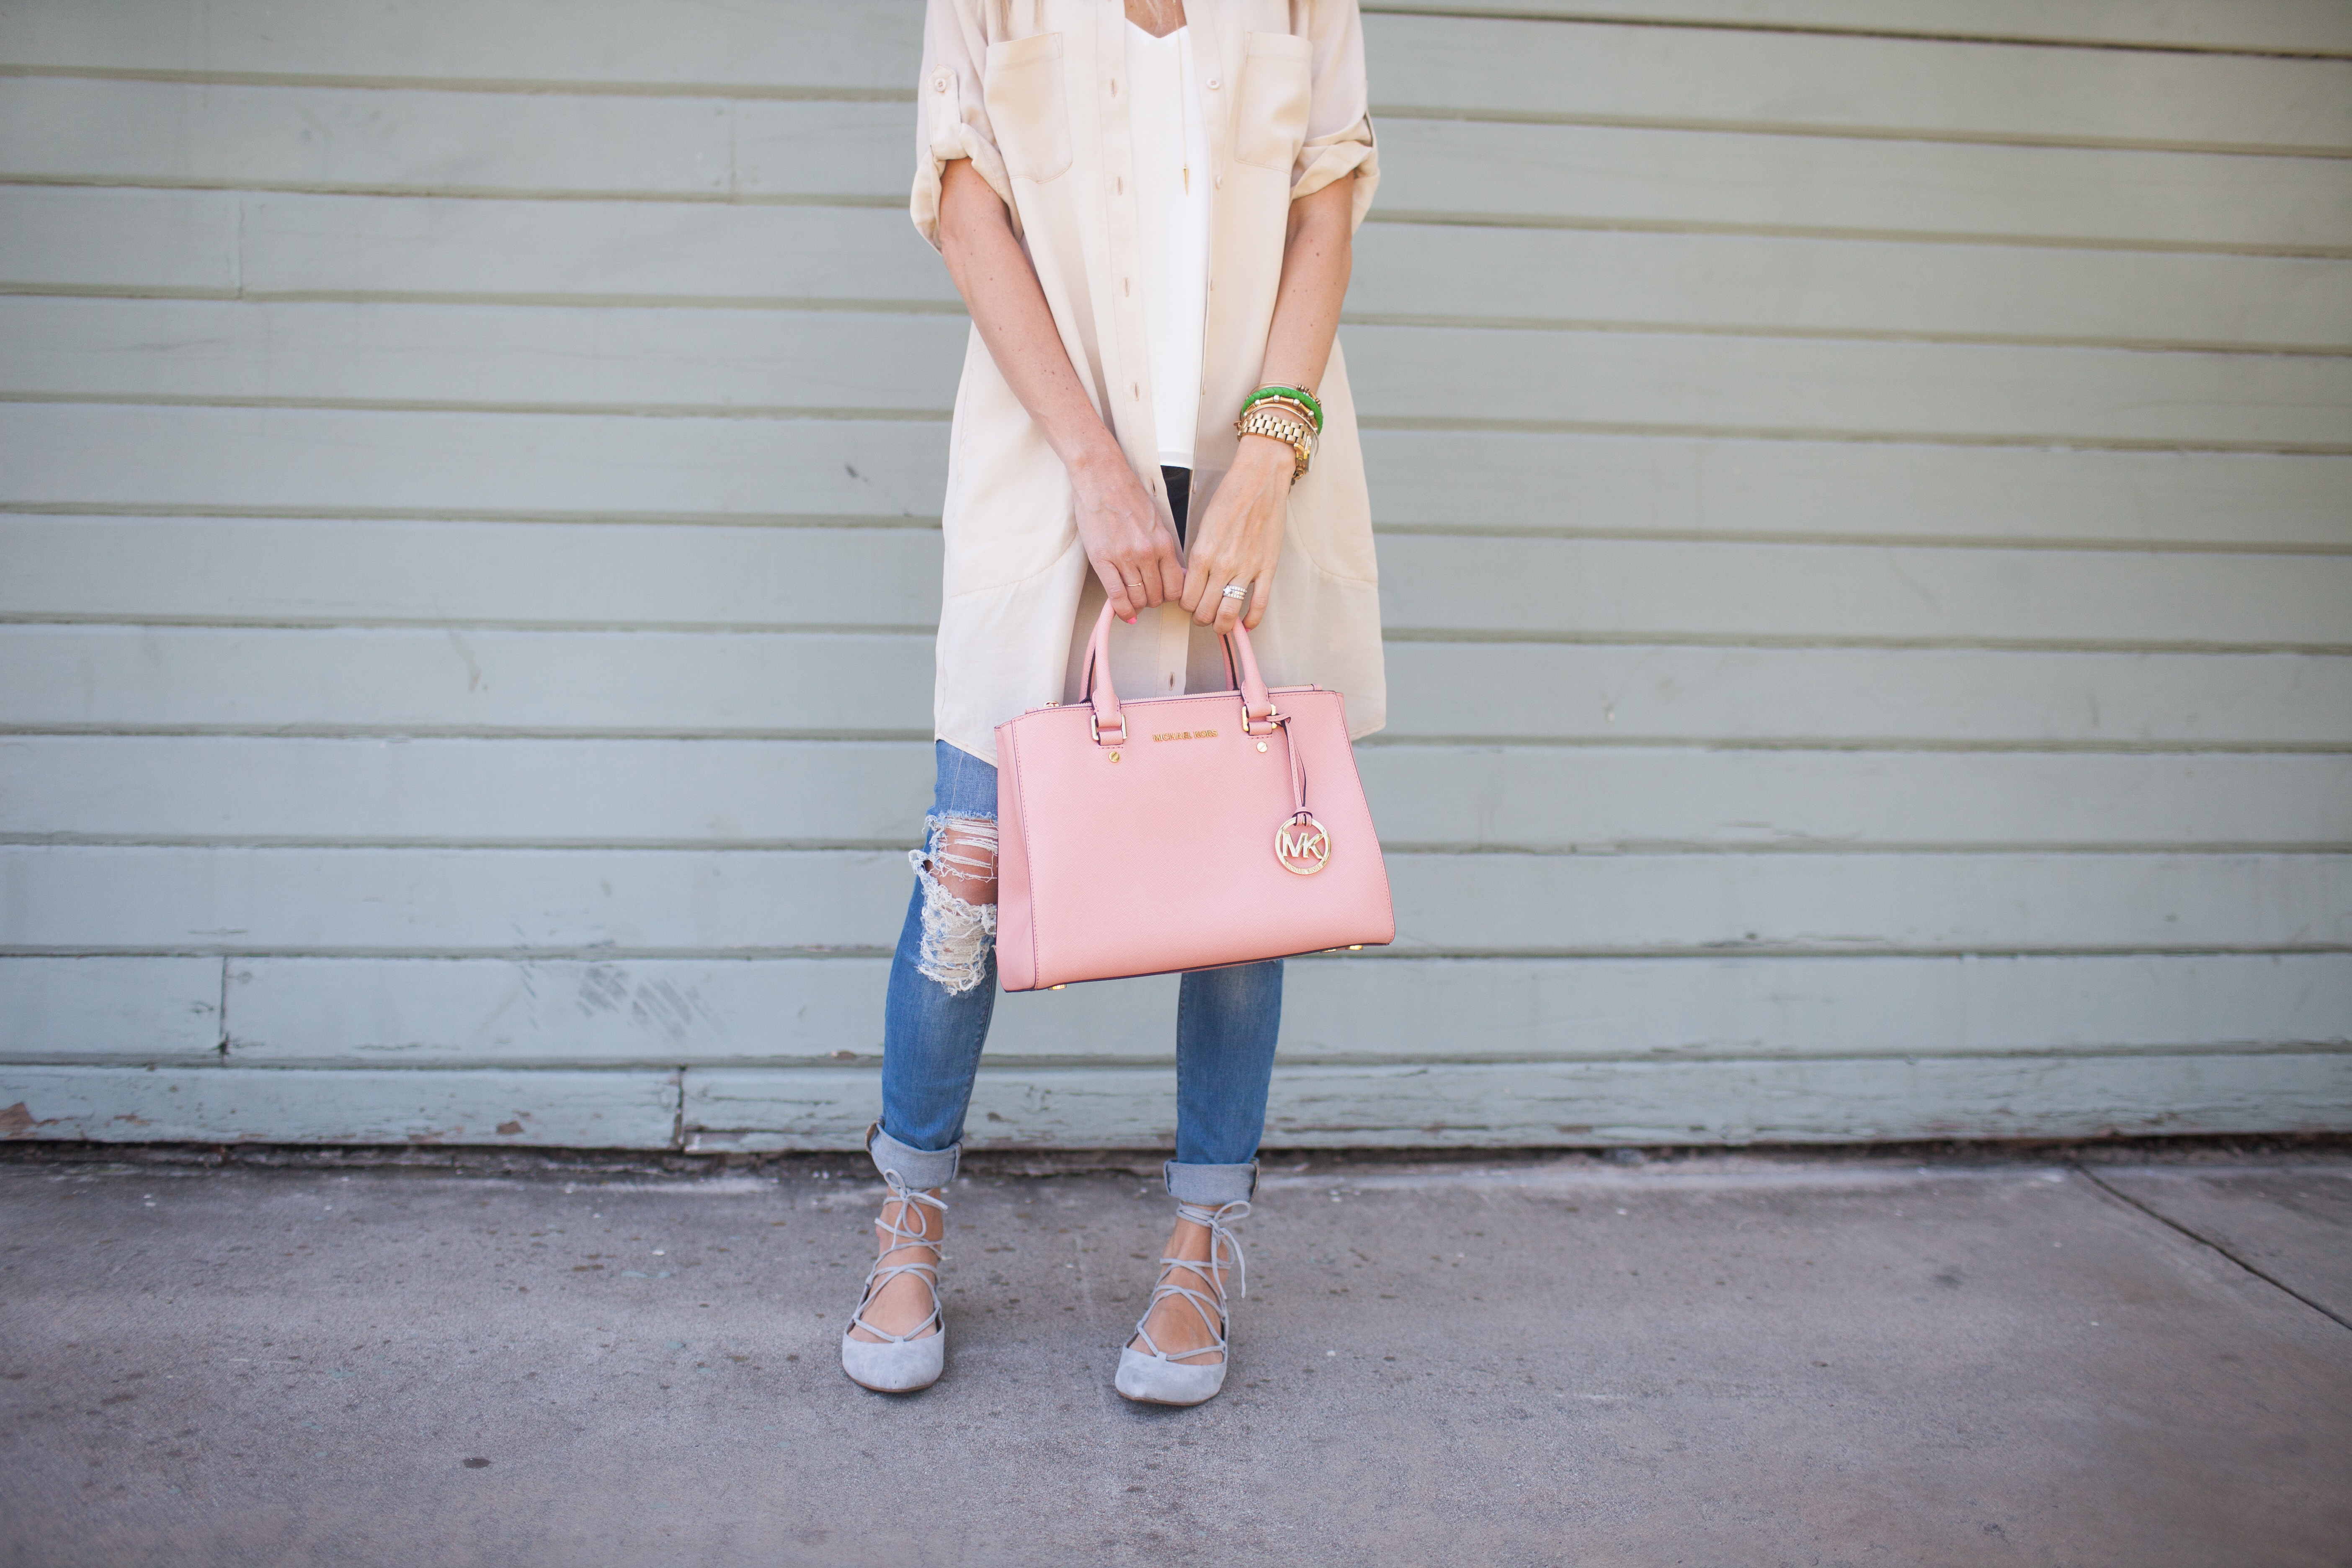 Kailee-Wright-shirtdress-jeans-nordstrom-7